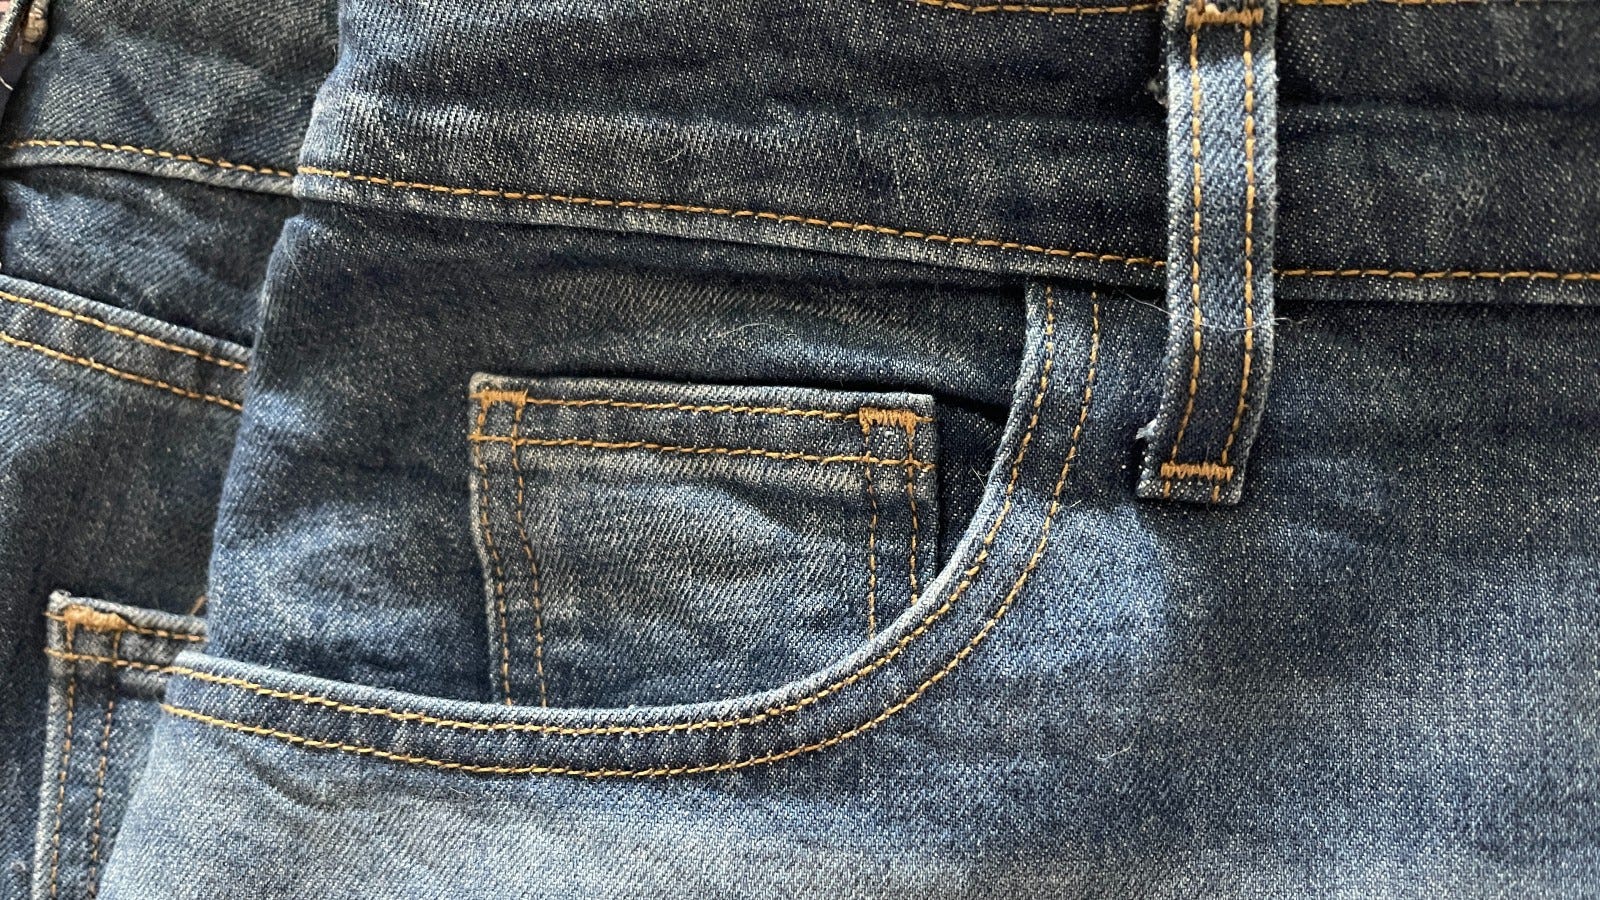 Why Do Jeans Have Those Tiny Pockets?